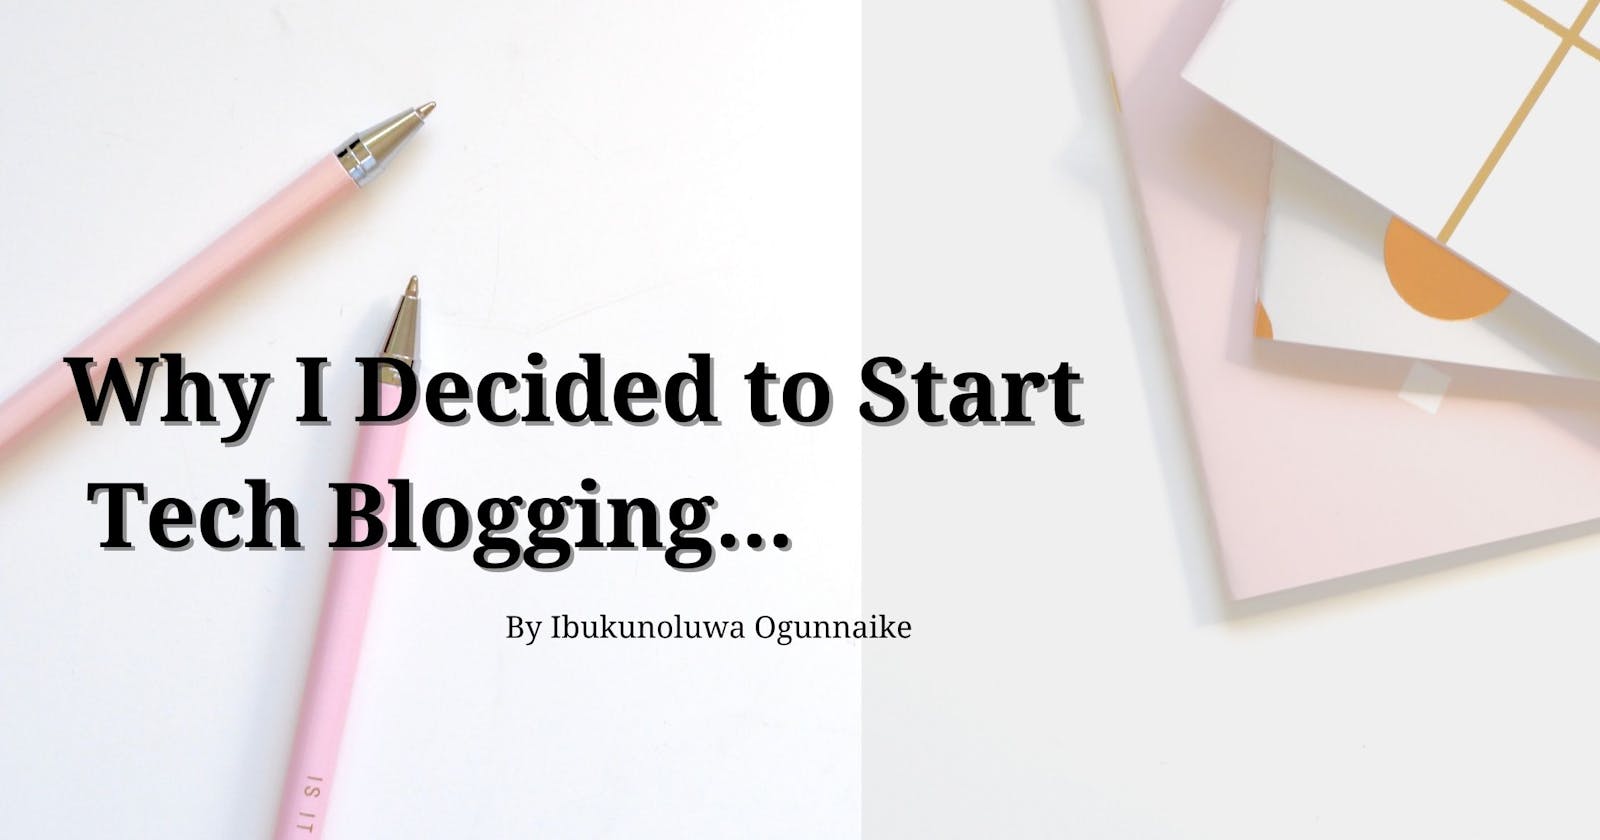 Why I Decided to Start Tech Blogging